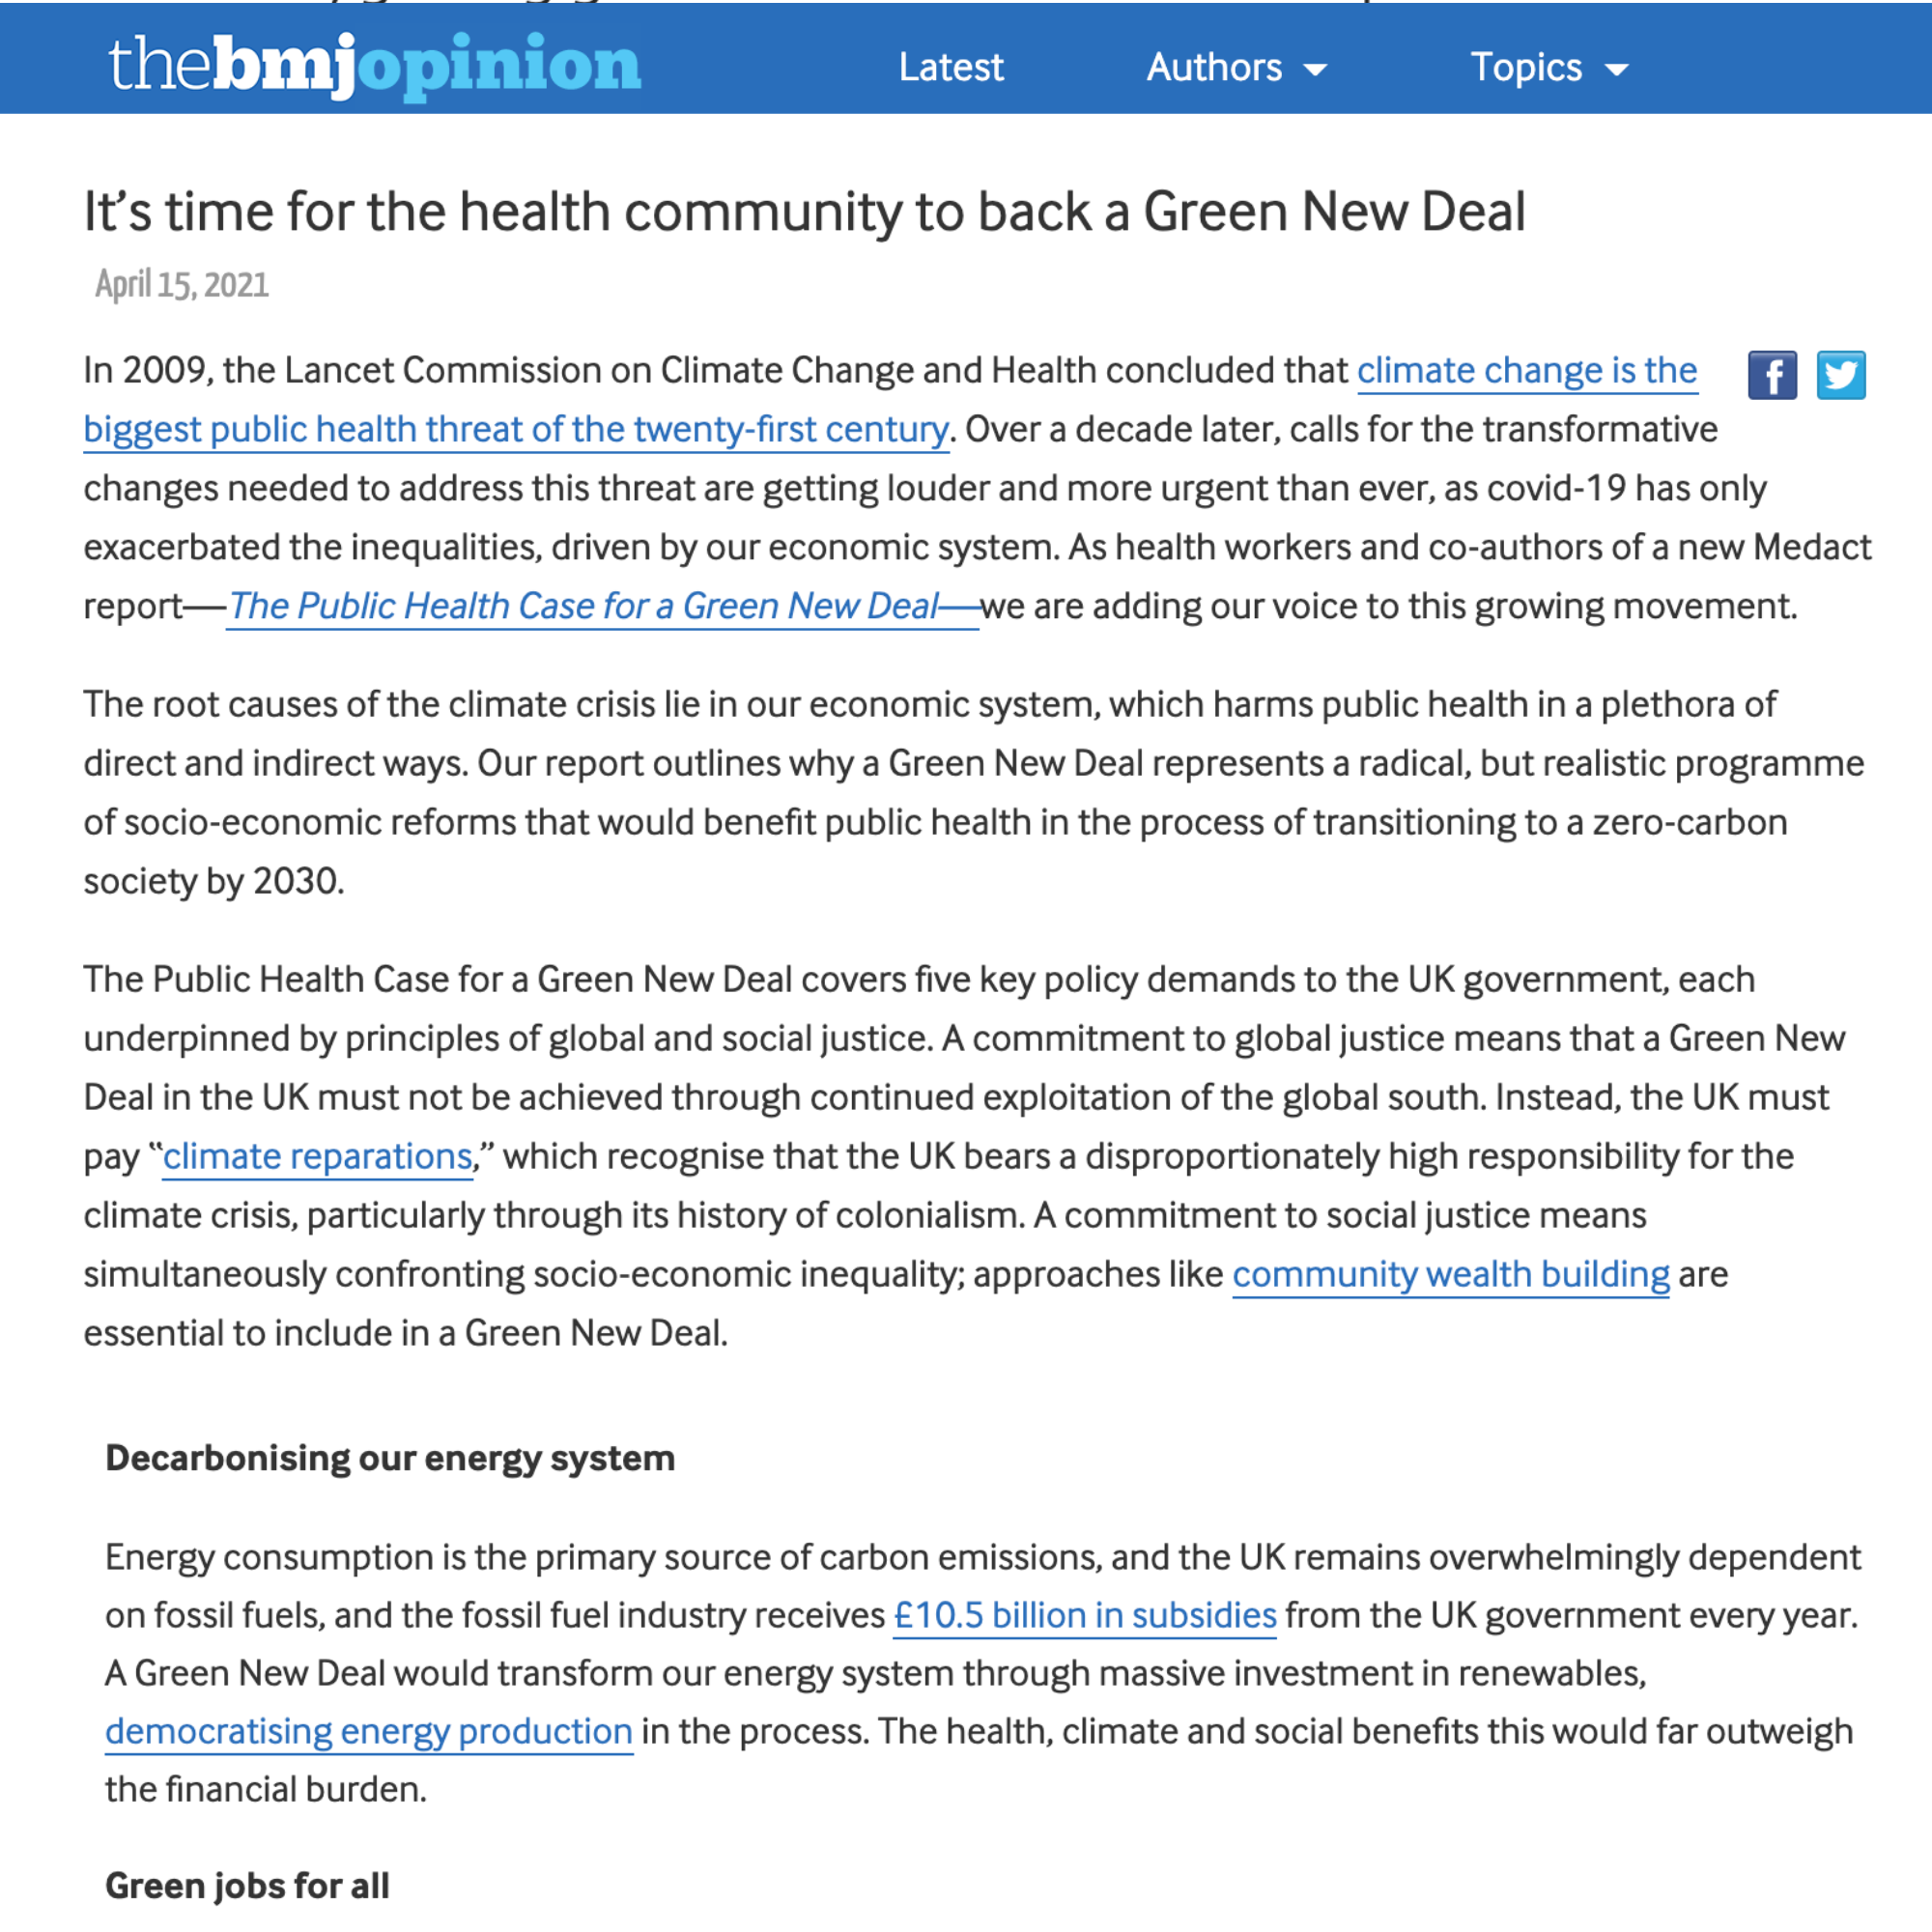 It’s time for the health community to back a Green New Deal